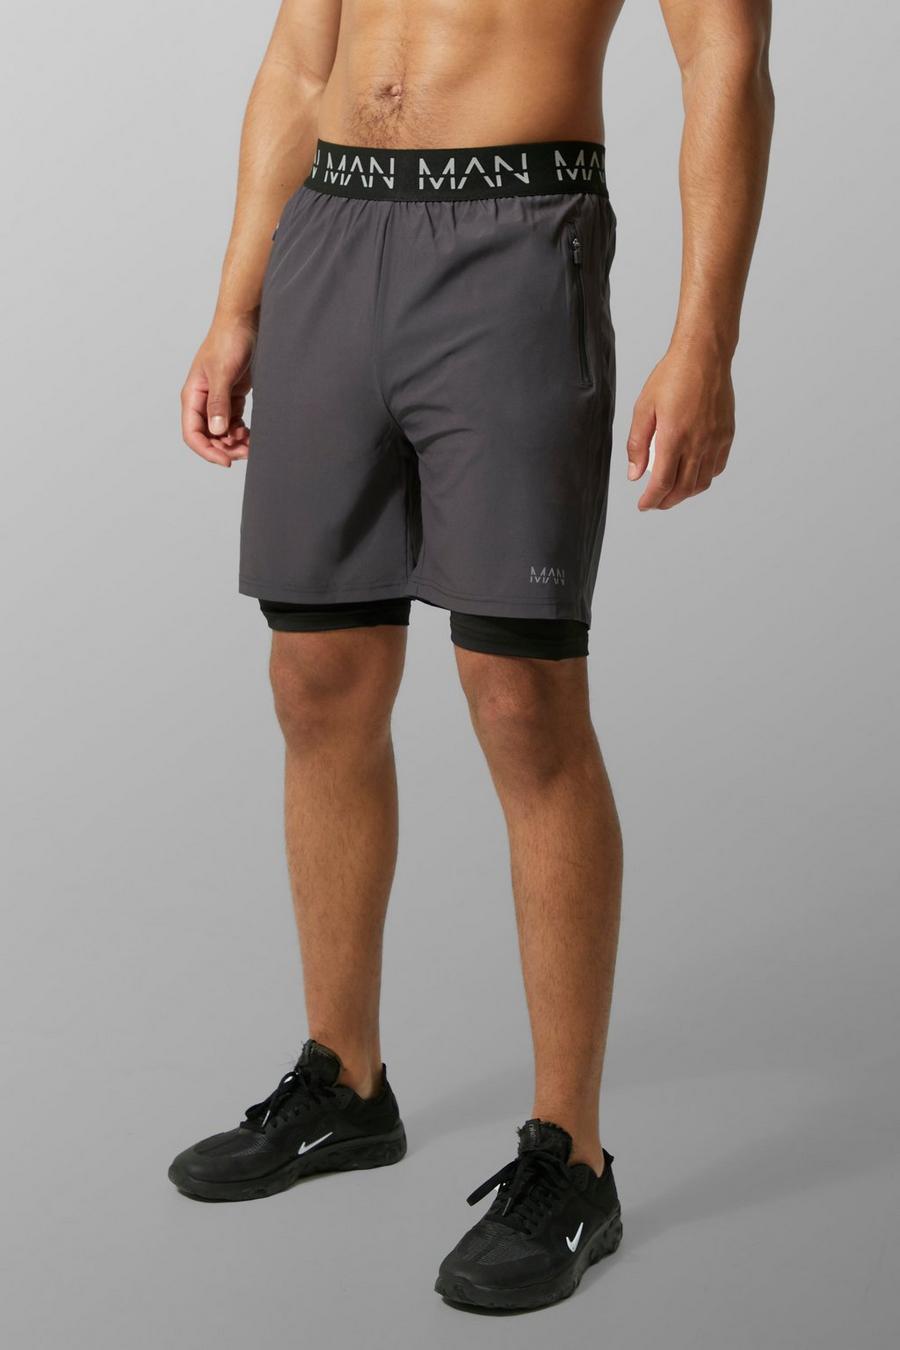 Charcoal grey Tall Man Active Gym 2-in-1 Short